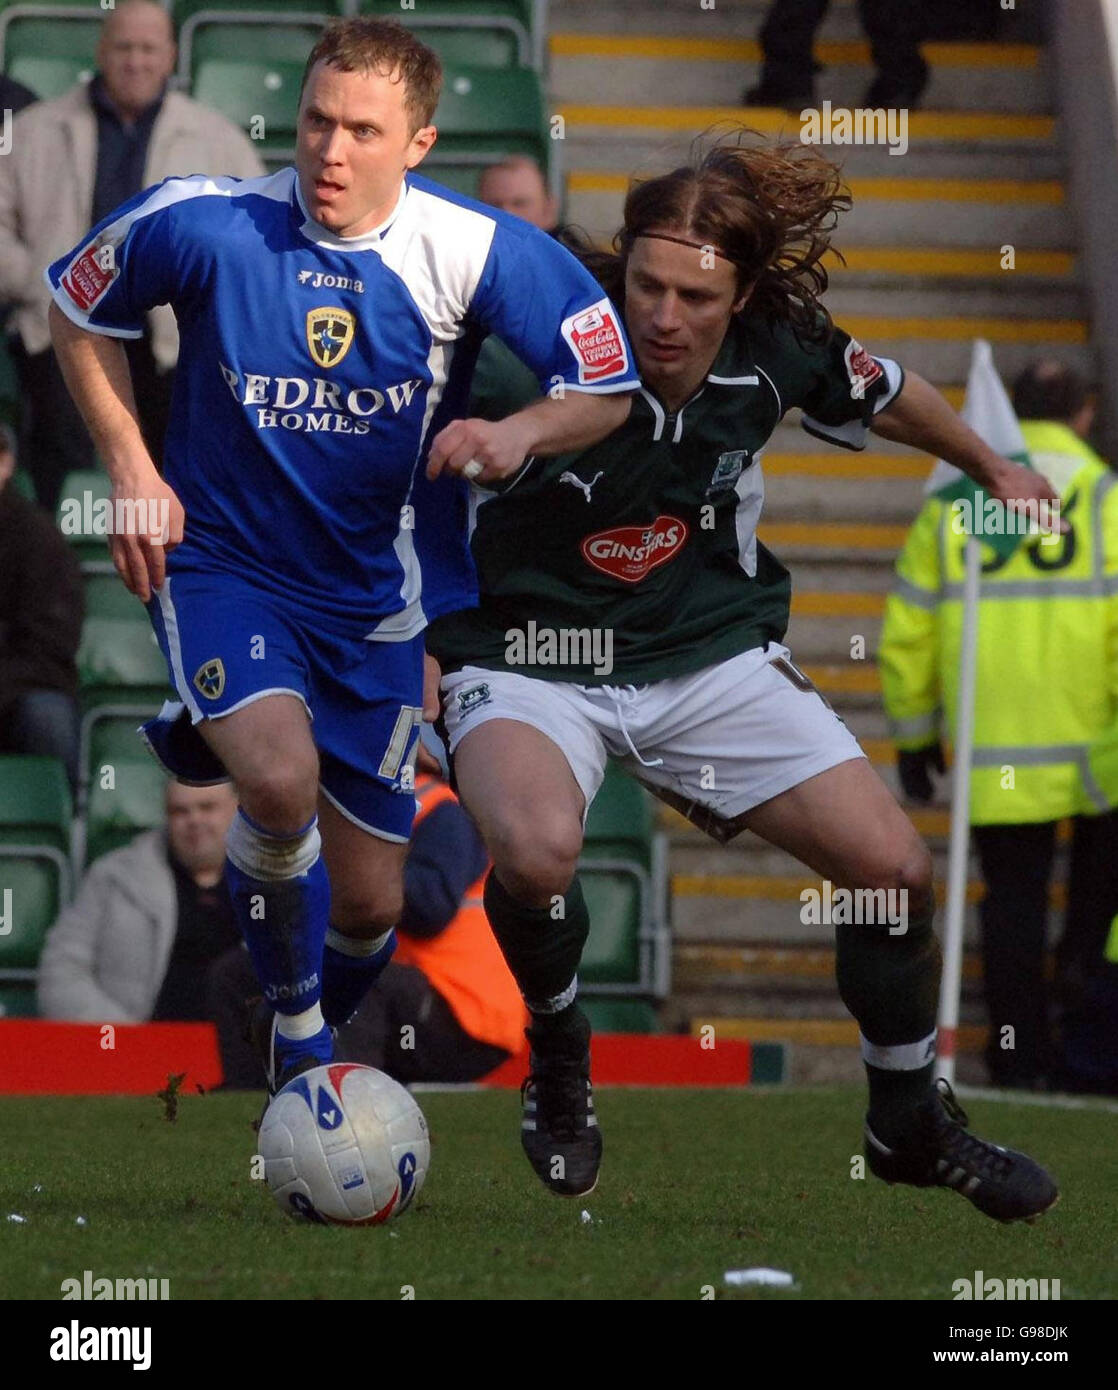 Cardiff's Kevin Cooper (L) breaks away from Plymouth Argyle's Lilian Nilas during the Coca-Cola Championship match at Home Park, Plymouth, Saturday March 18, 2006. PRESS ASSOCIATION photo. Photo credit should read: Neil Munns/PA. NO UNOFFICIAL CLUB WEBSITE USE. Stock Photo